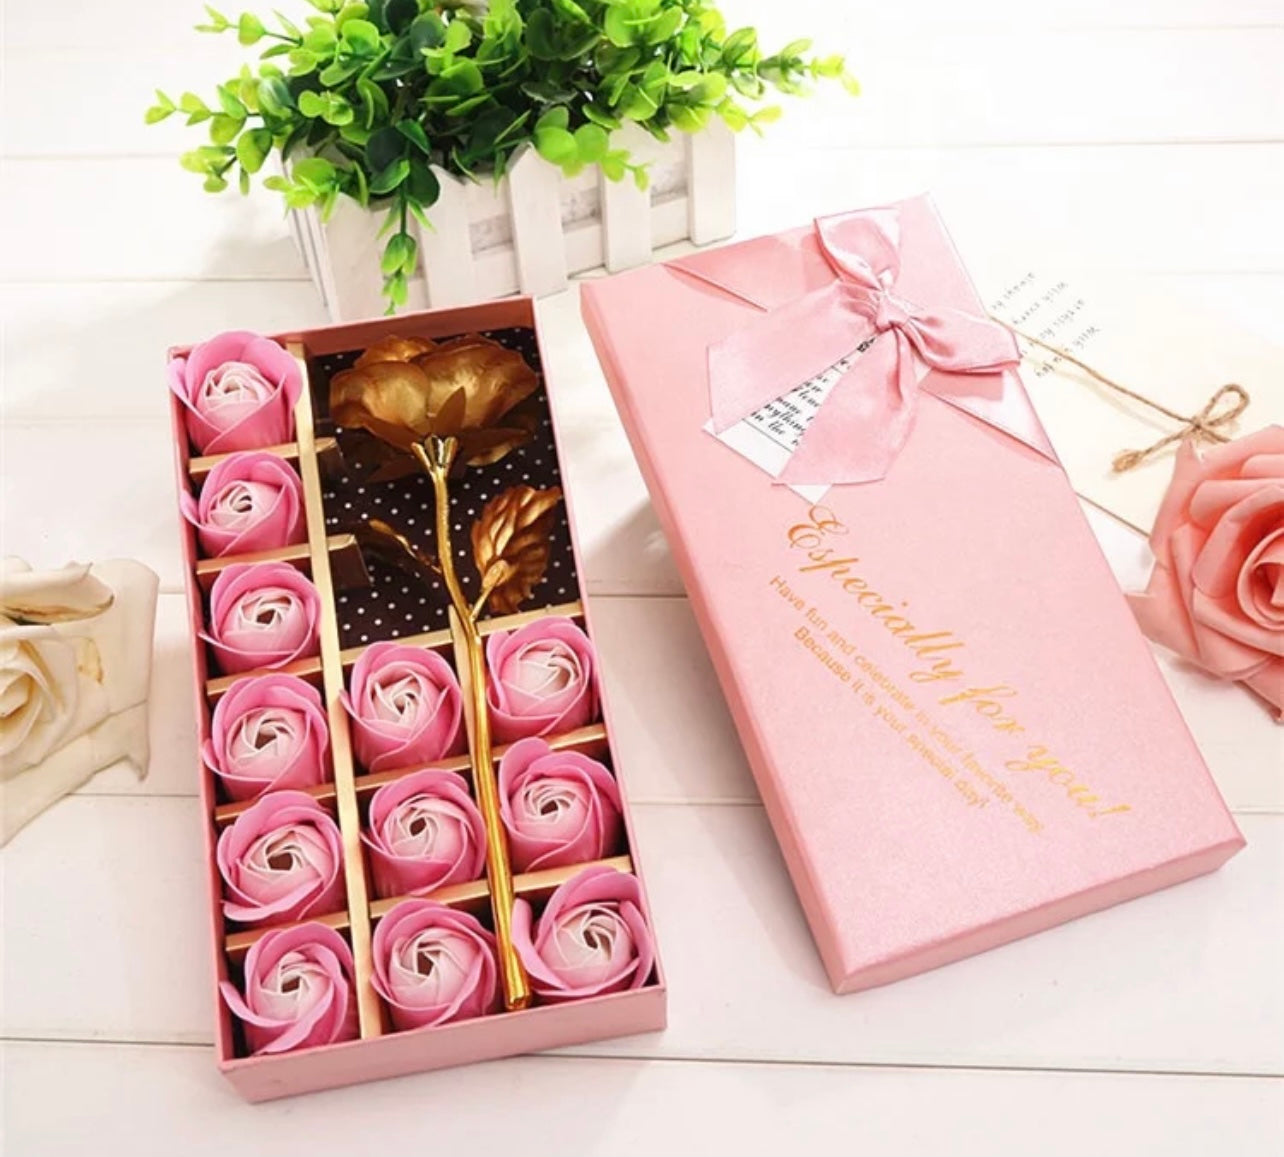 Gold rose and 12 soap roses gift sets